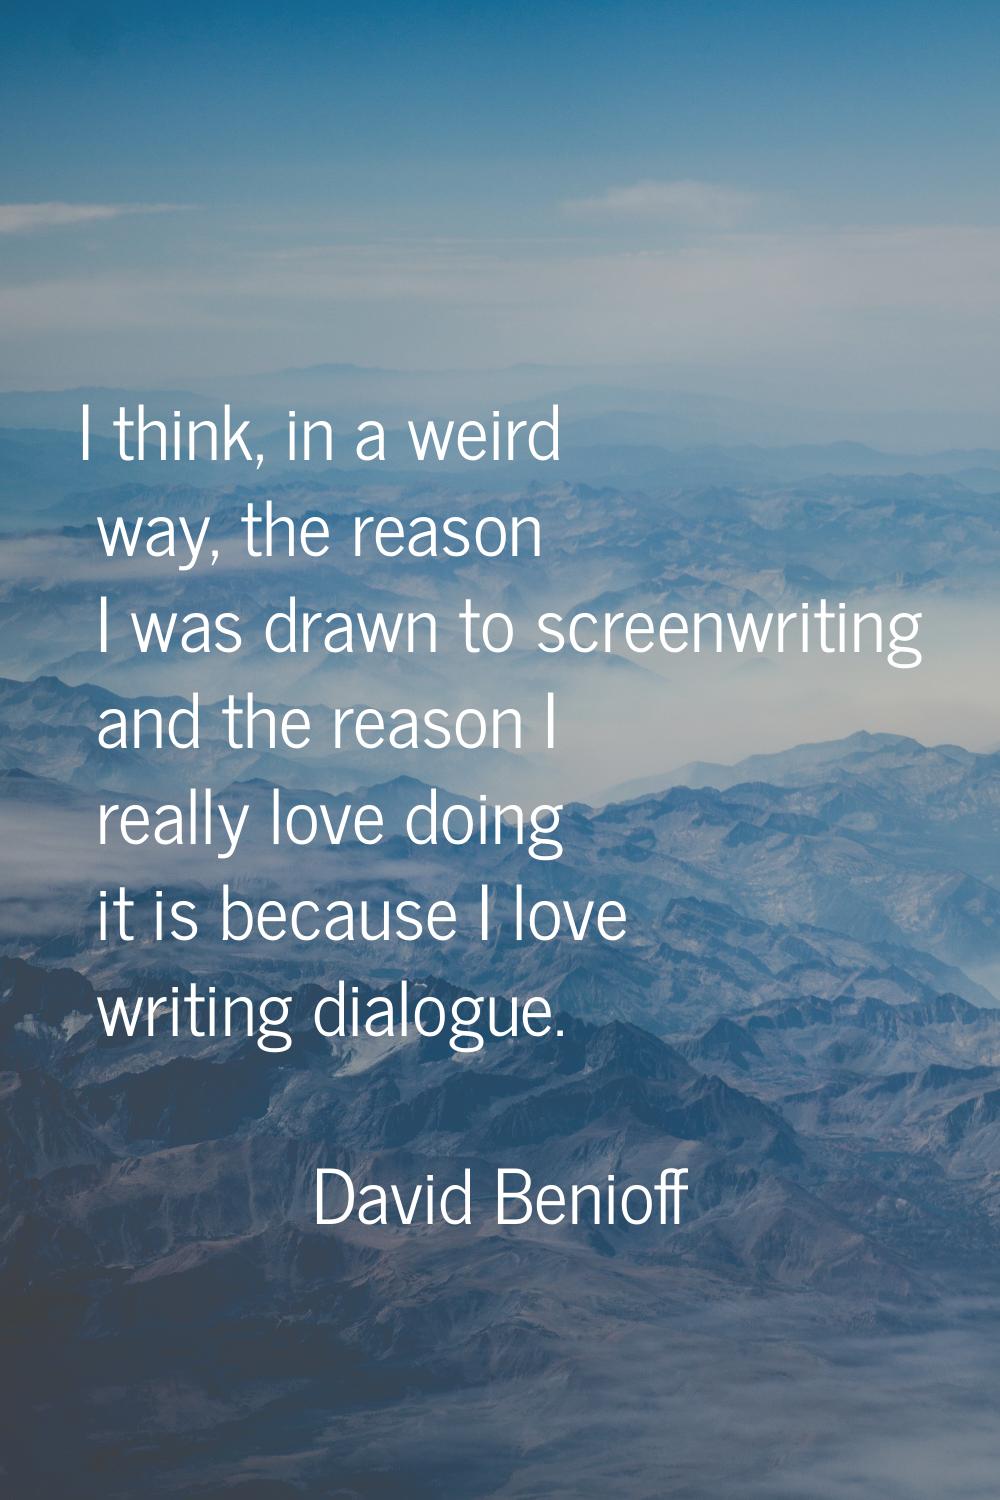 I think, in a weird way, the reason I was drawn to screenwriting and the reason I really love doing